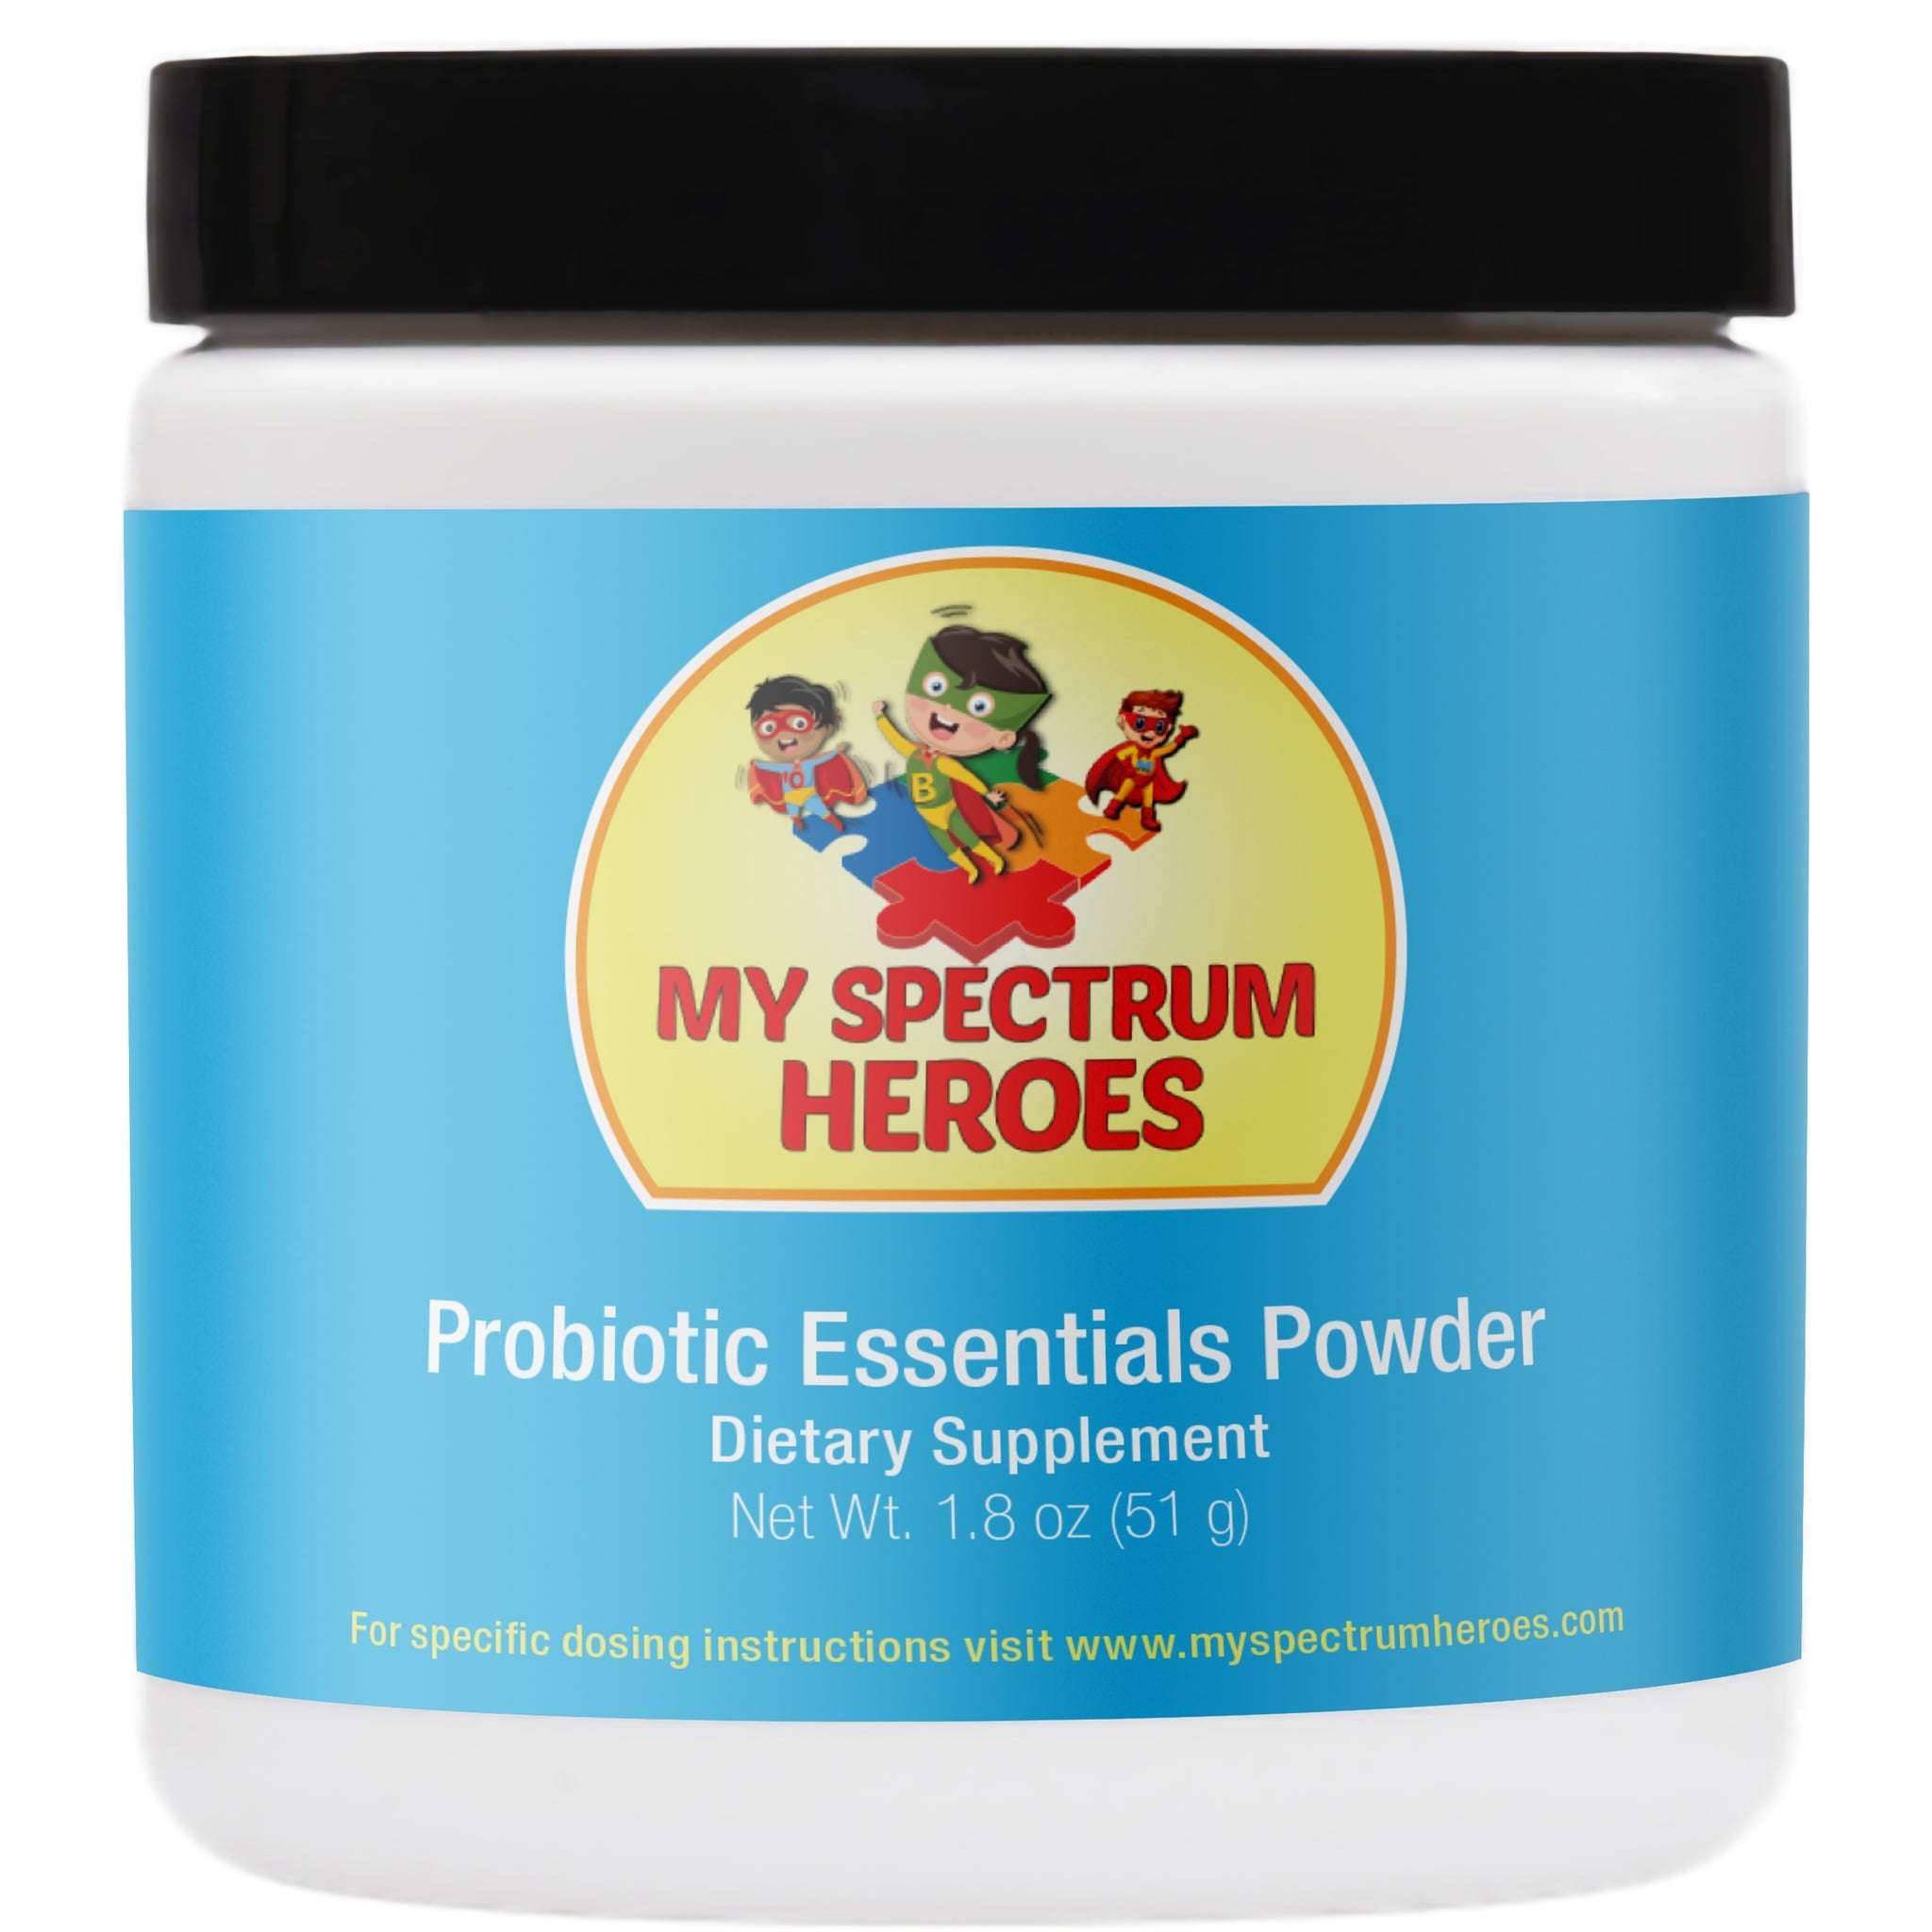 Probiotic Essentials Powder for Children with Autism and ADHD  My ...